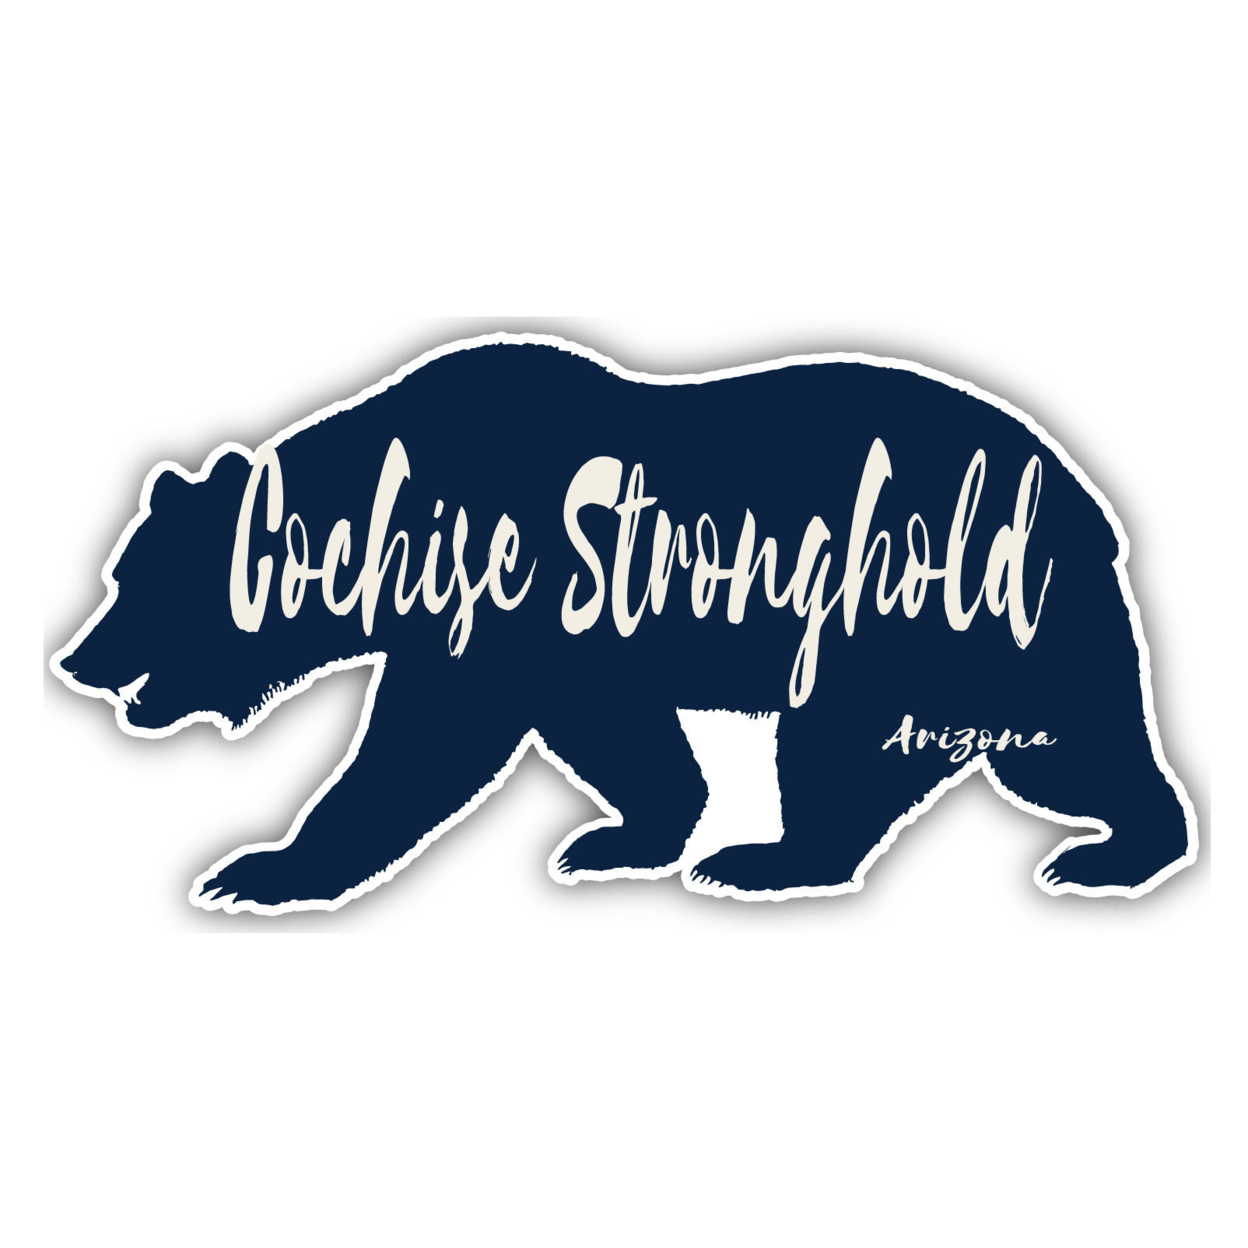 Cochise Stronghold Arizona Souvenir Decorative Stickers (Choose Theme And Size) - 4-Pack, 8-Inch, Bear